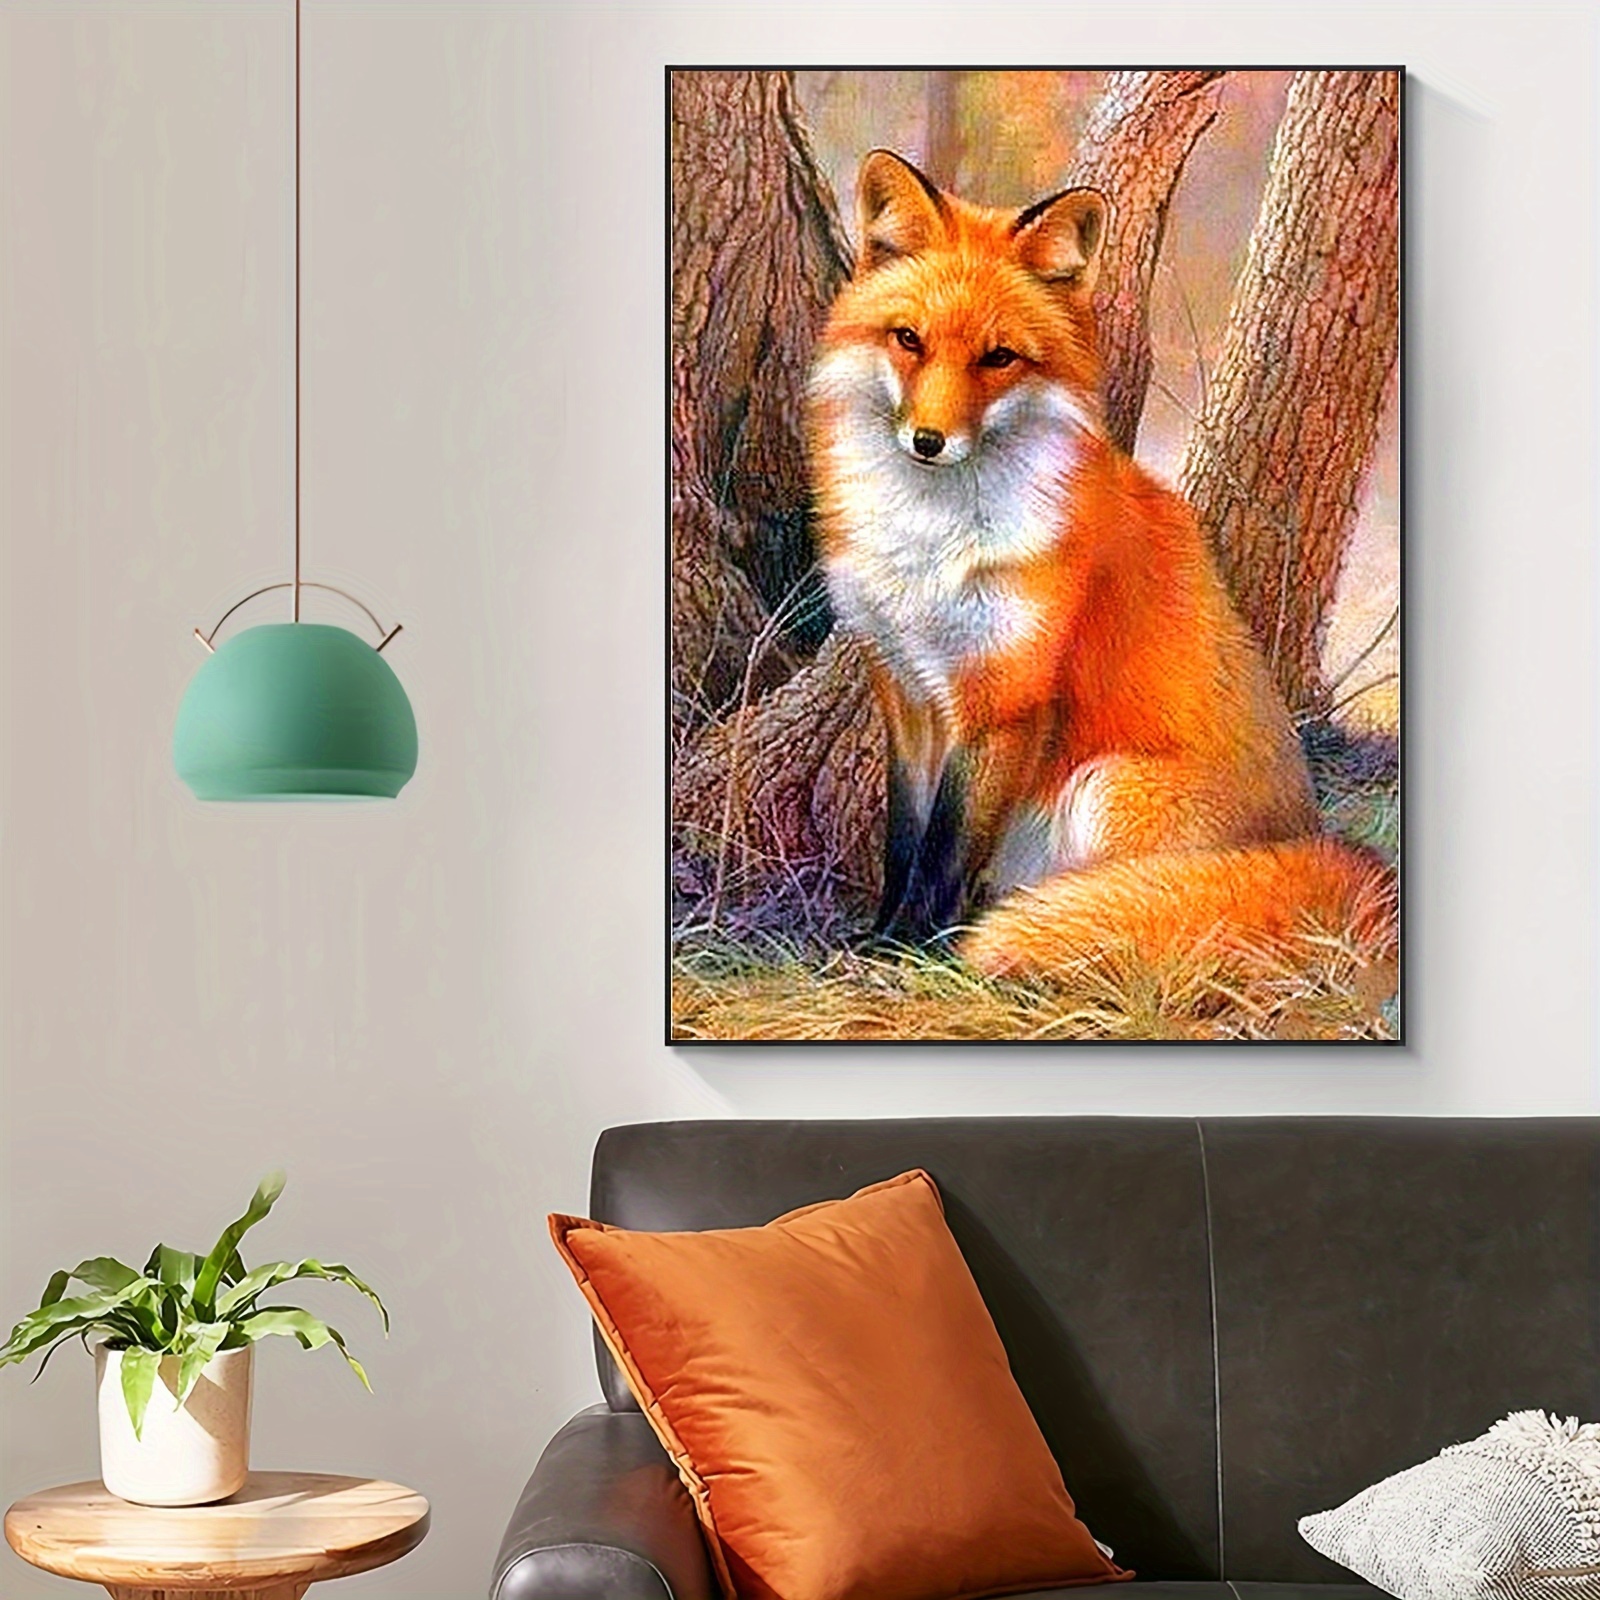 Fox)Diamond Painting Full Kits,DIY 5D Round Diamond Art Painting Kits for  Kids Adults,Diamond Painting by Number Kits Dimond Picture Crystal Art  Craft Kits for Home Wall Decor(35x35cm)_Shenzhen Ouna Technology Co., Ltd.